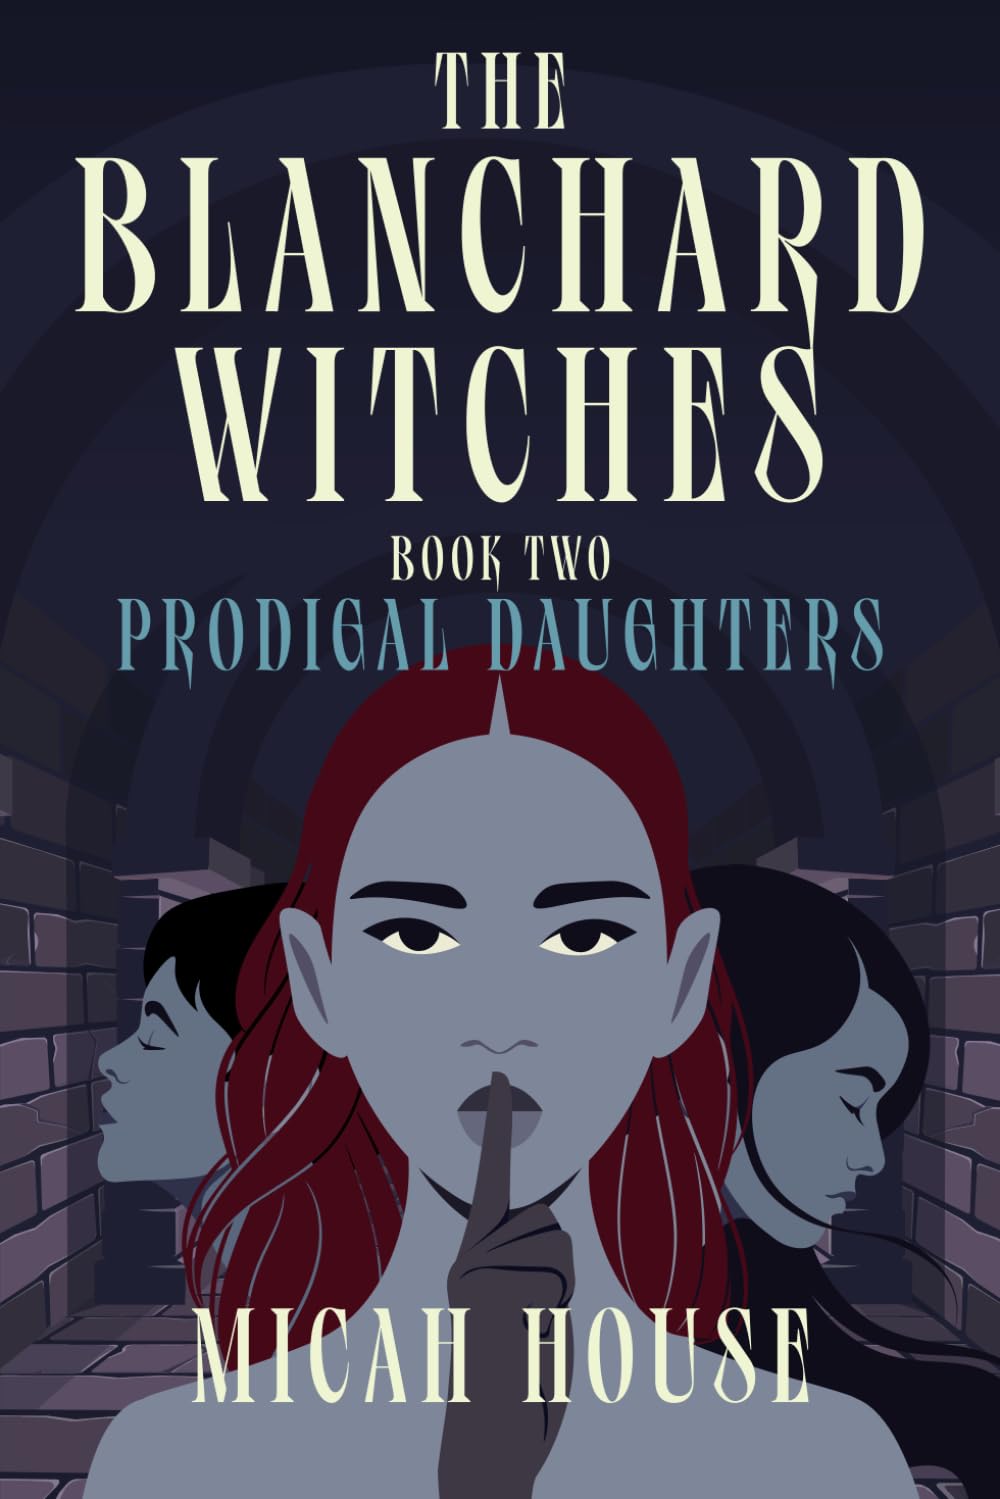 The Blanchard Witches: Prodigal Daughters (Book 2 of 5)